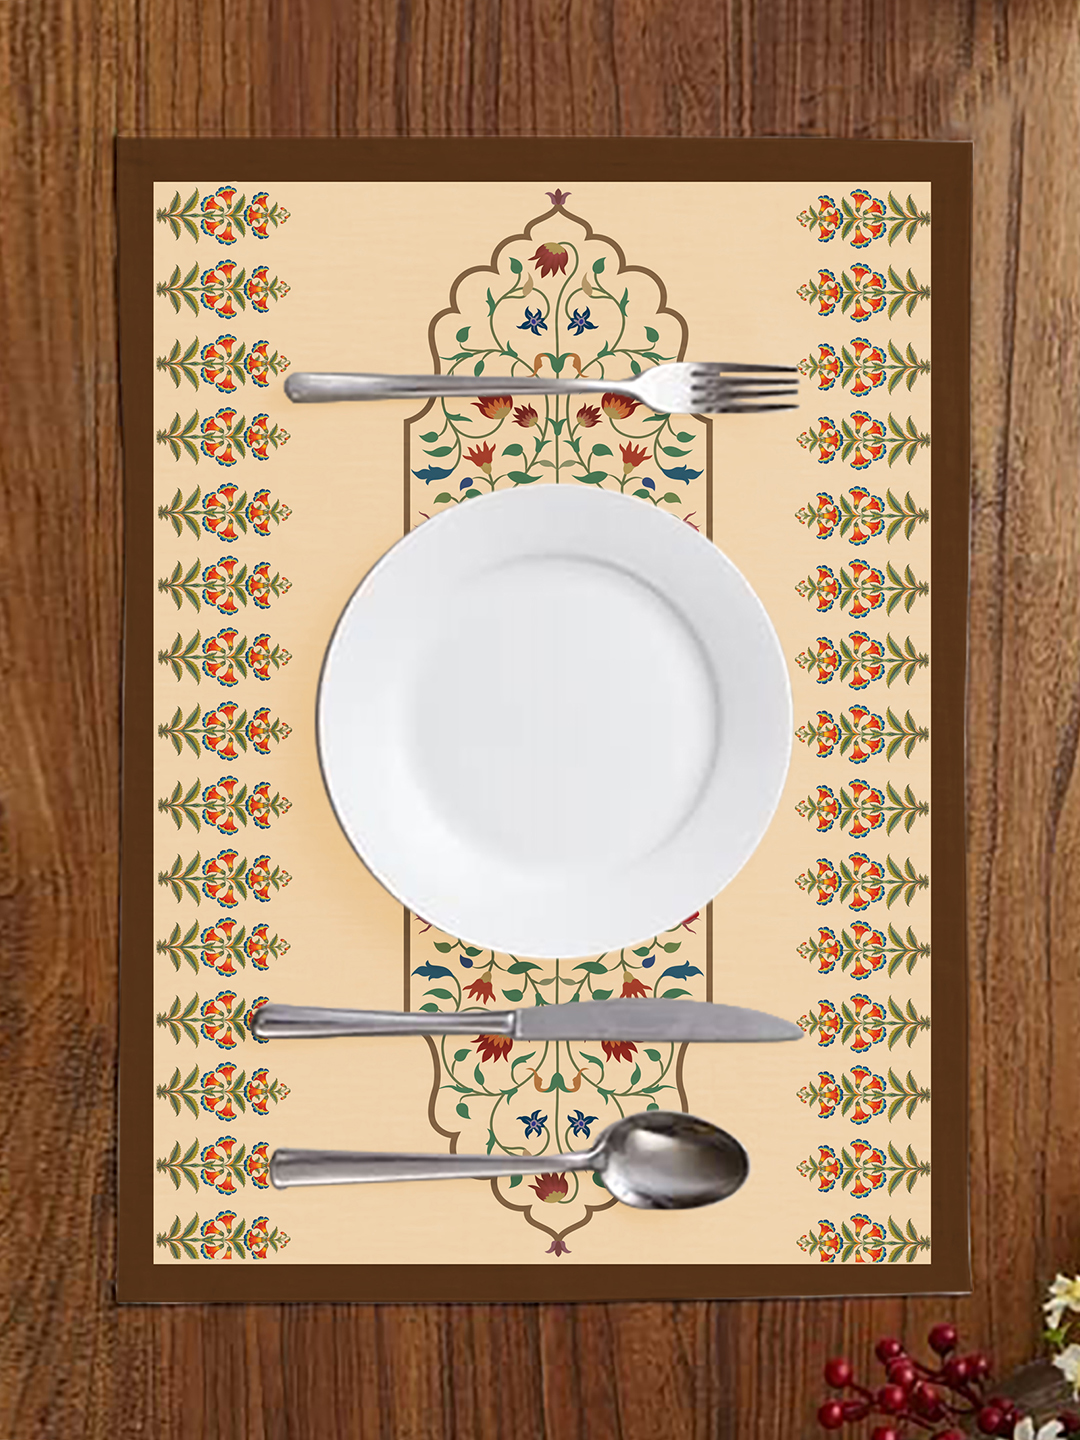 homewards Peach Mughal Design with Border Placemat Set of 6